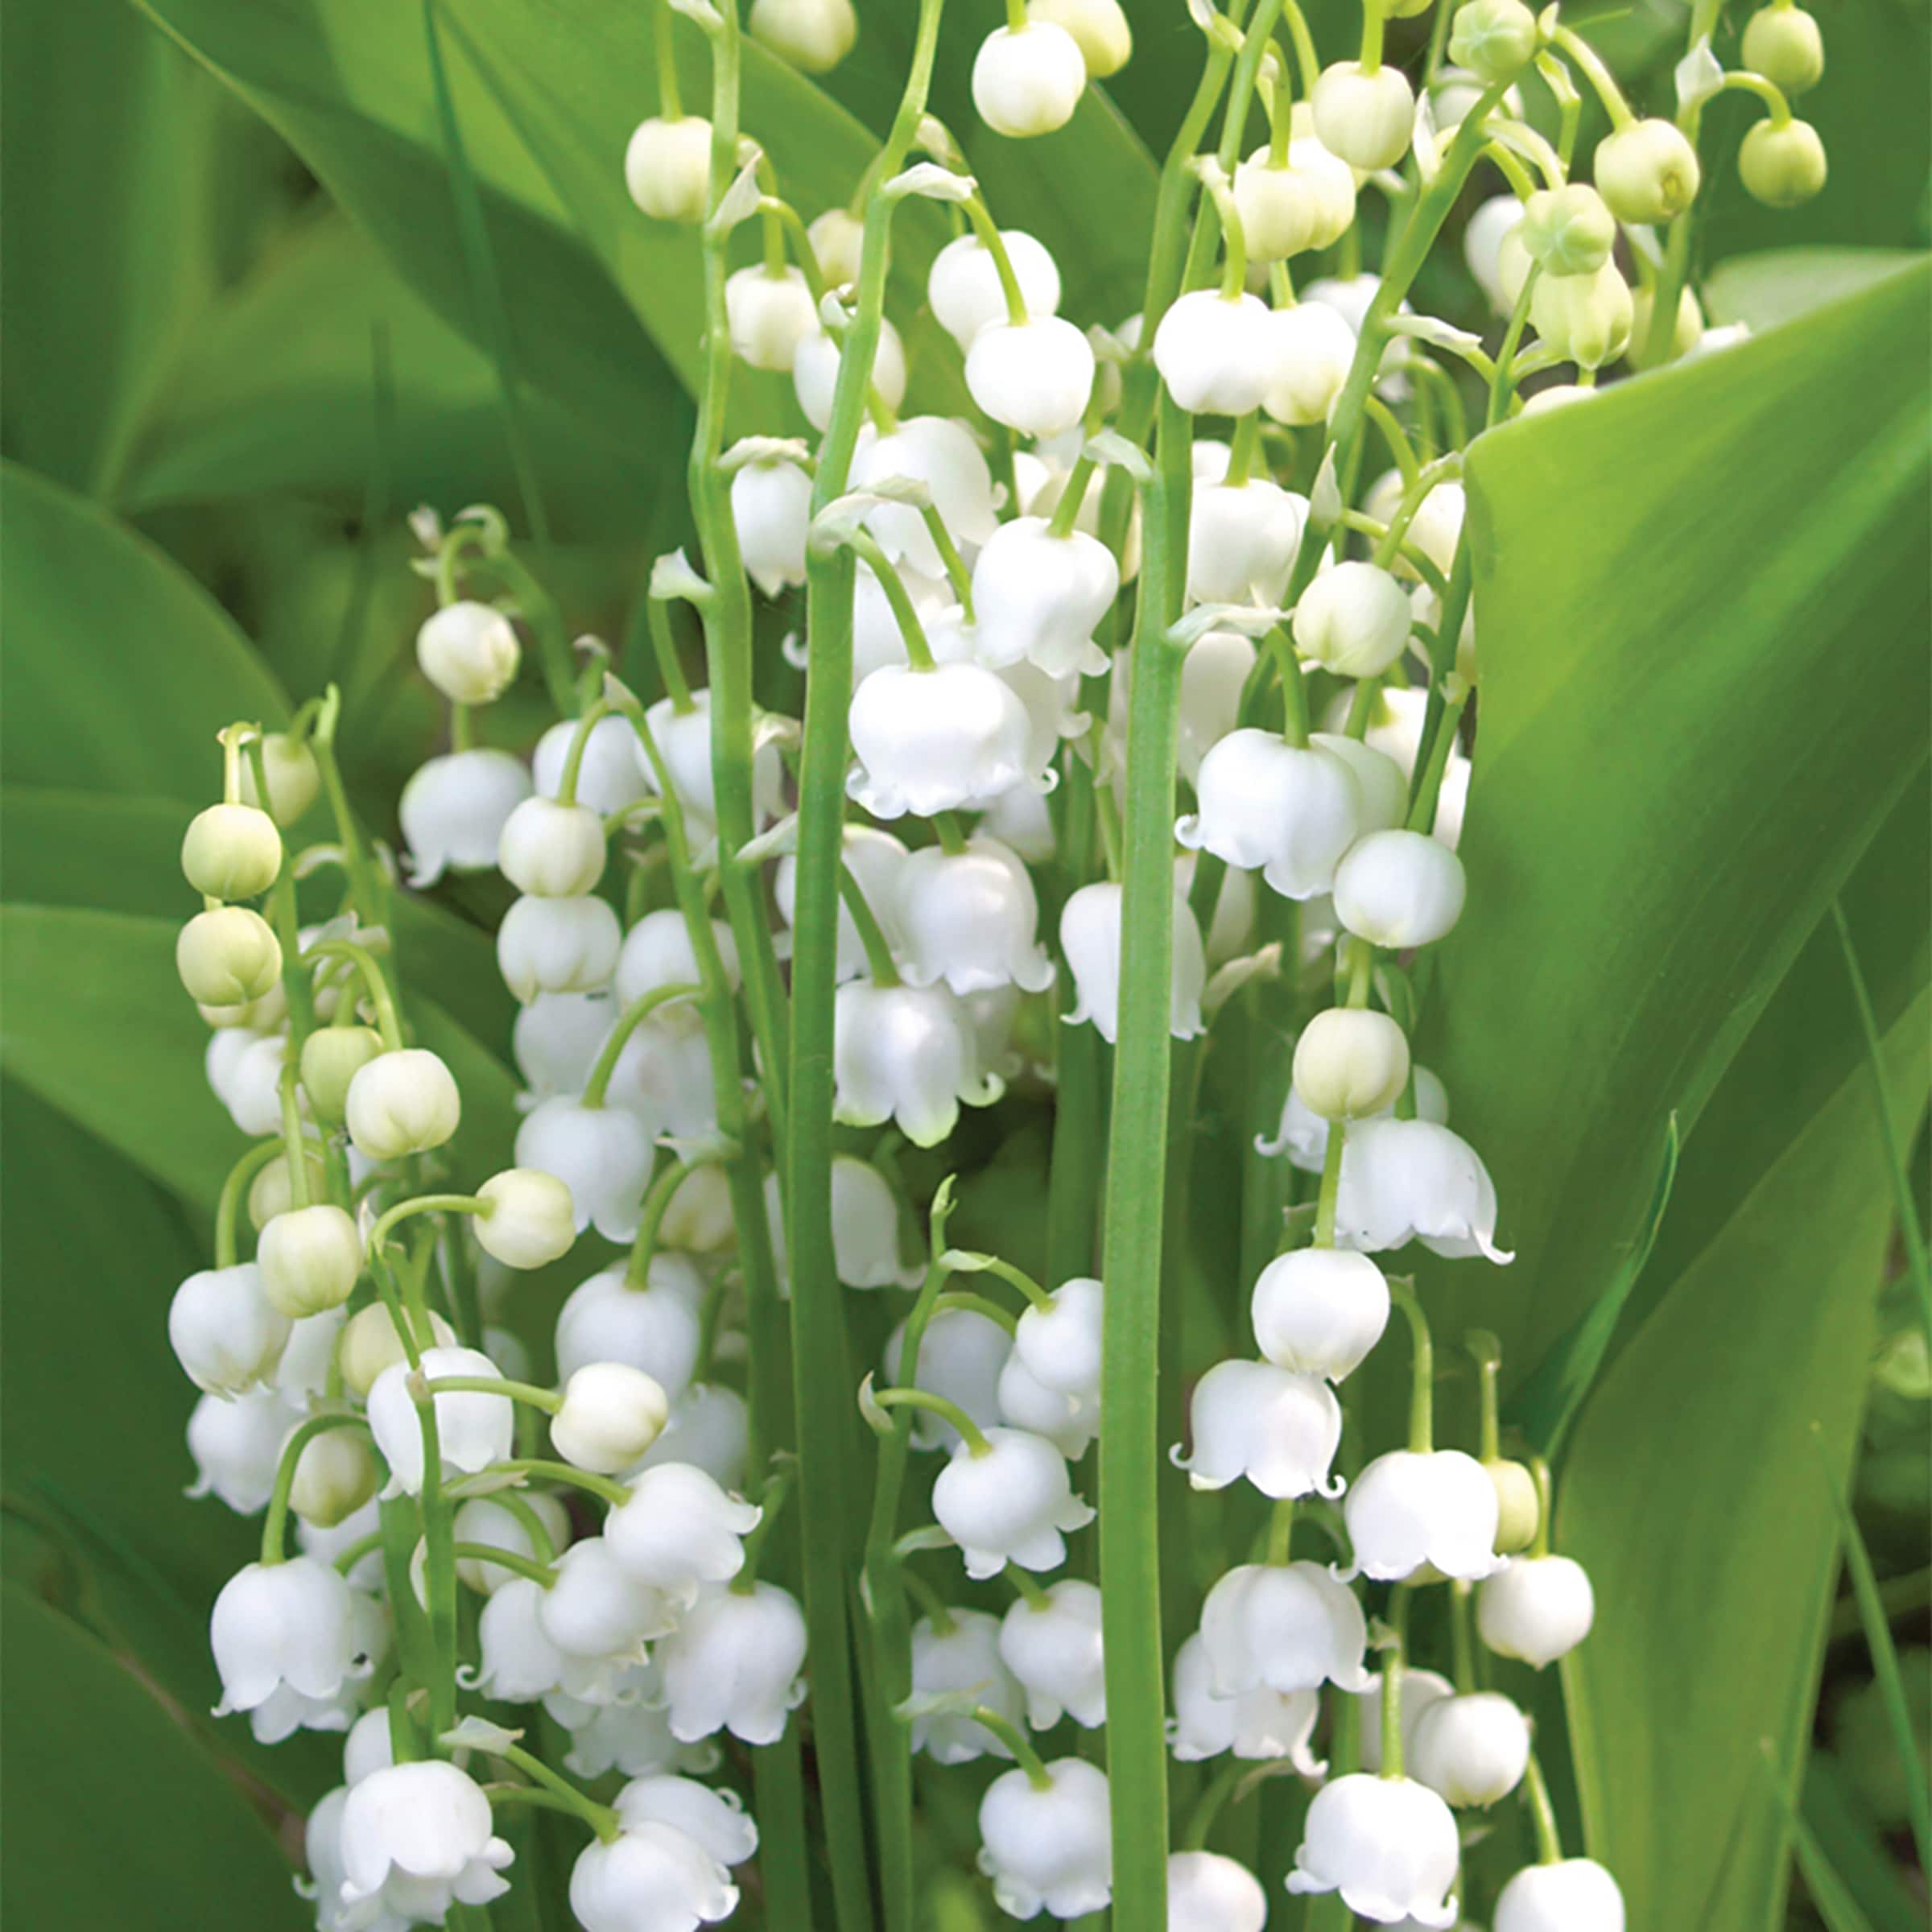 YouShouldGrowThis: Lily-of-the-valley is a valuable plant